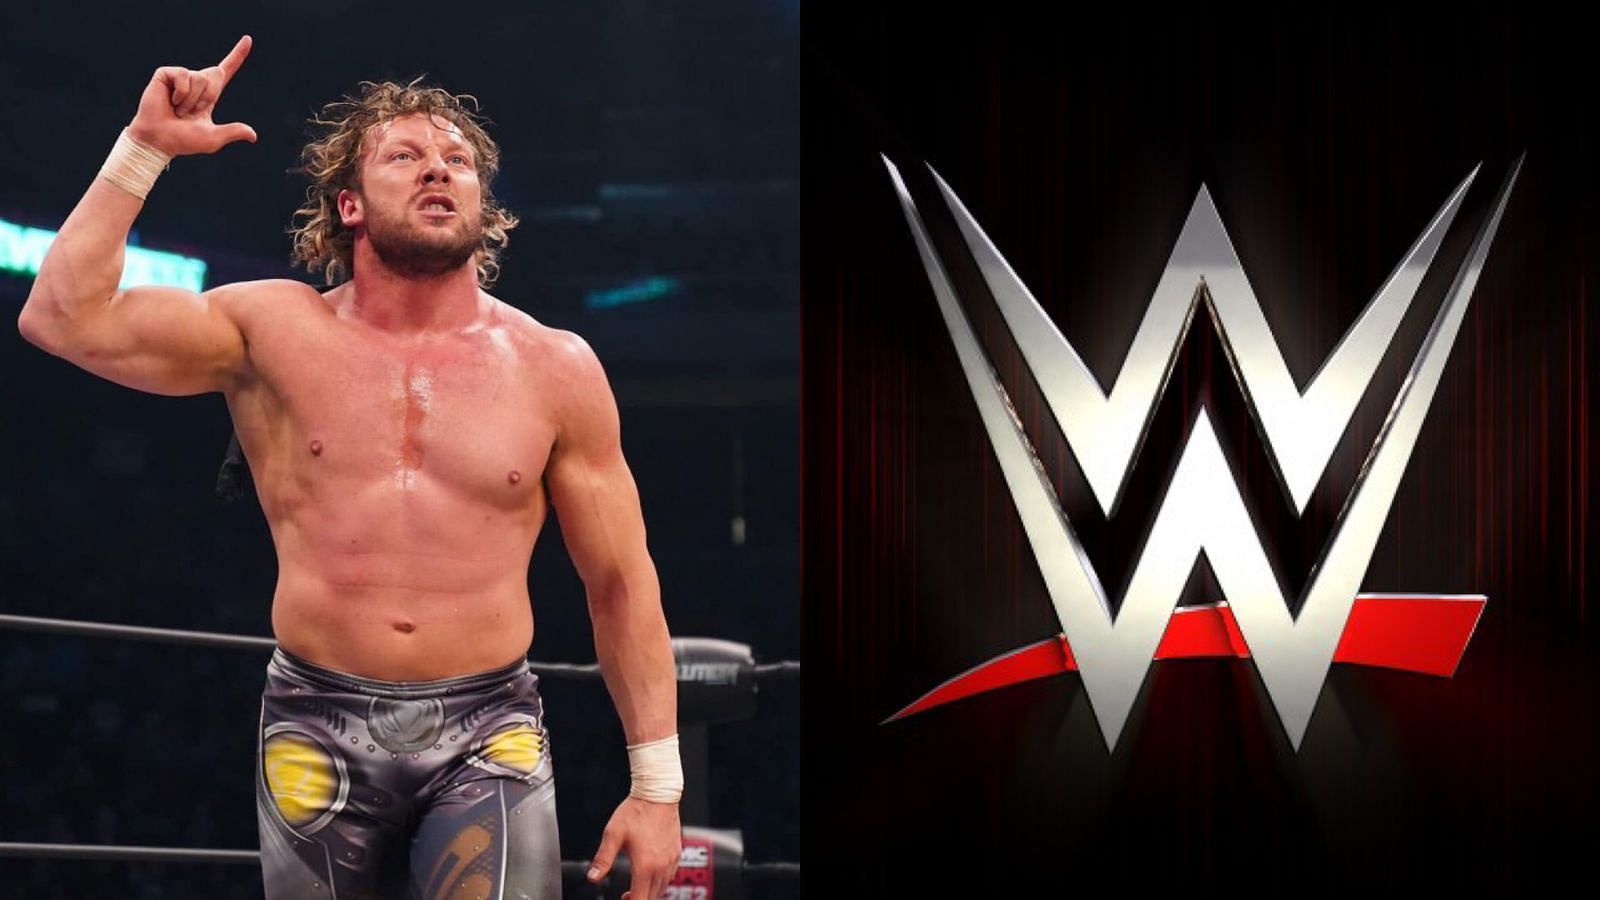 Kenny Omega had a small stint with WWE